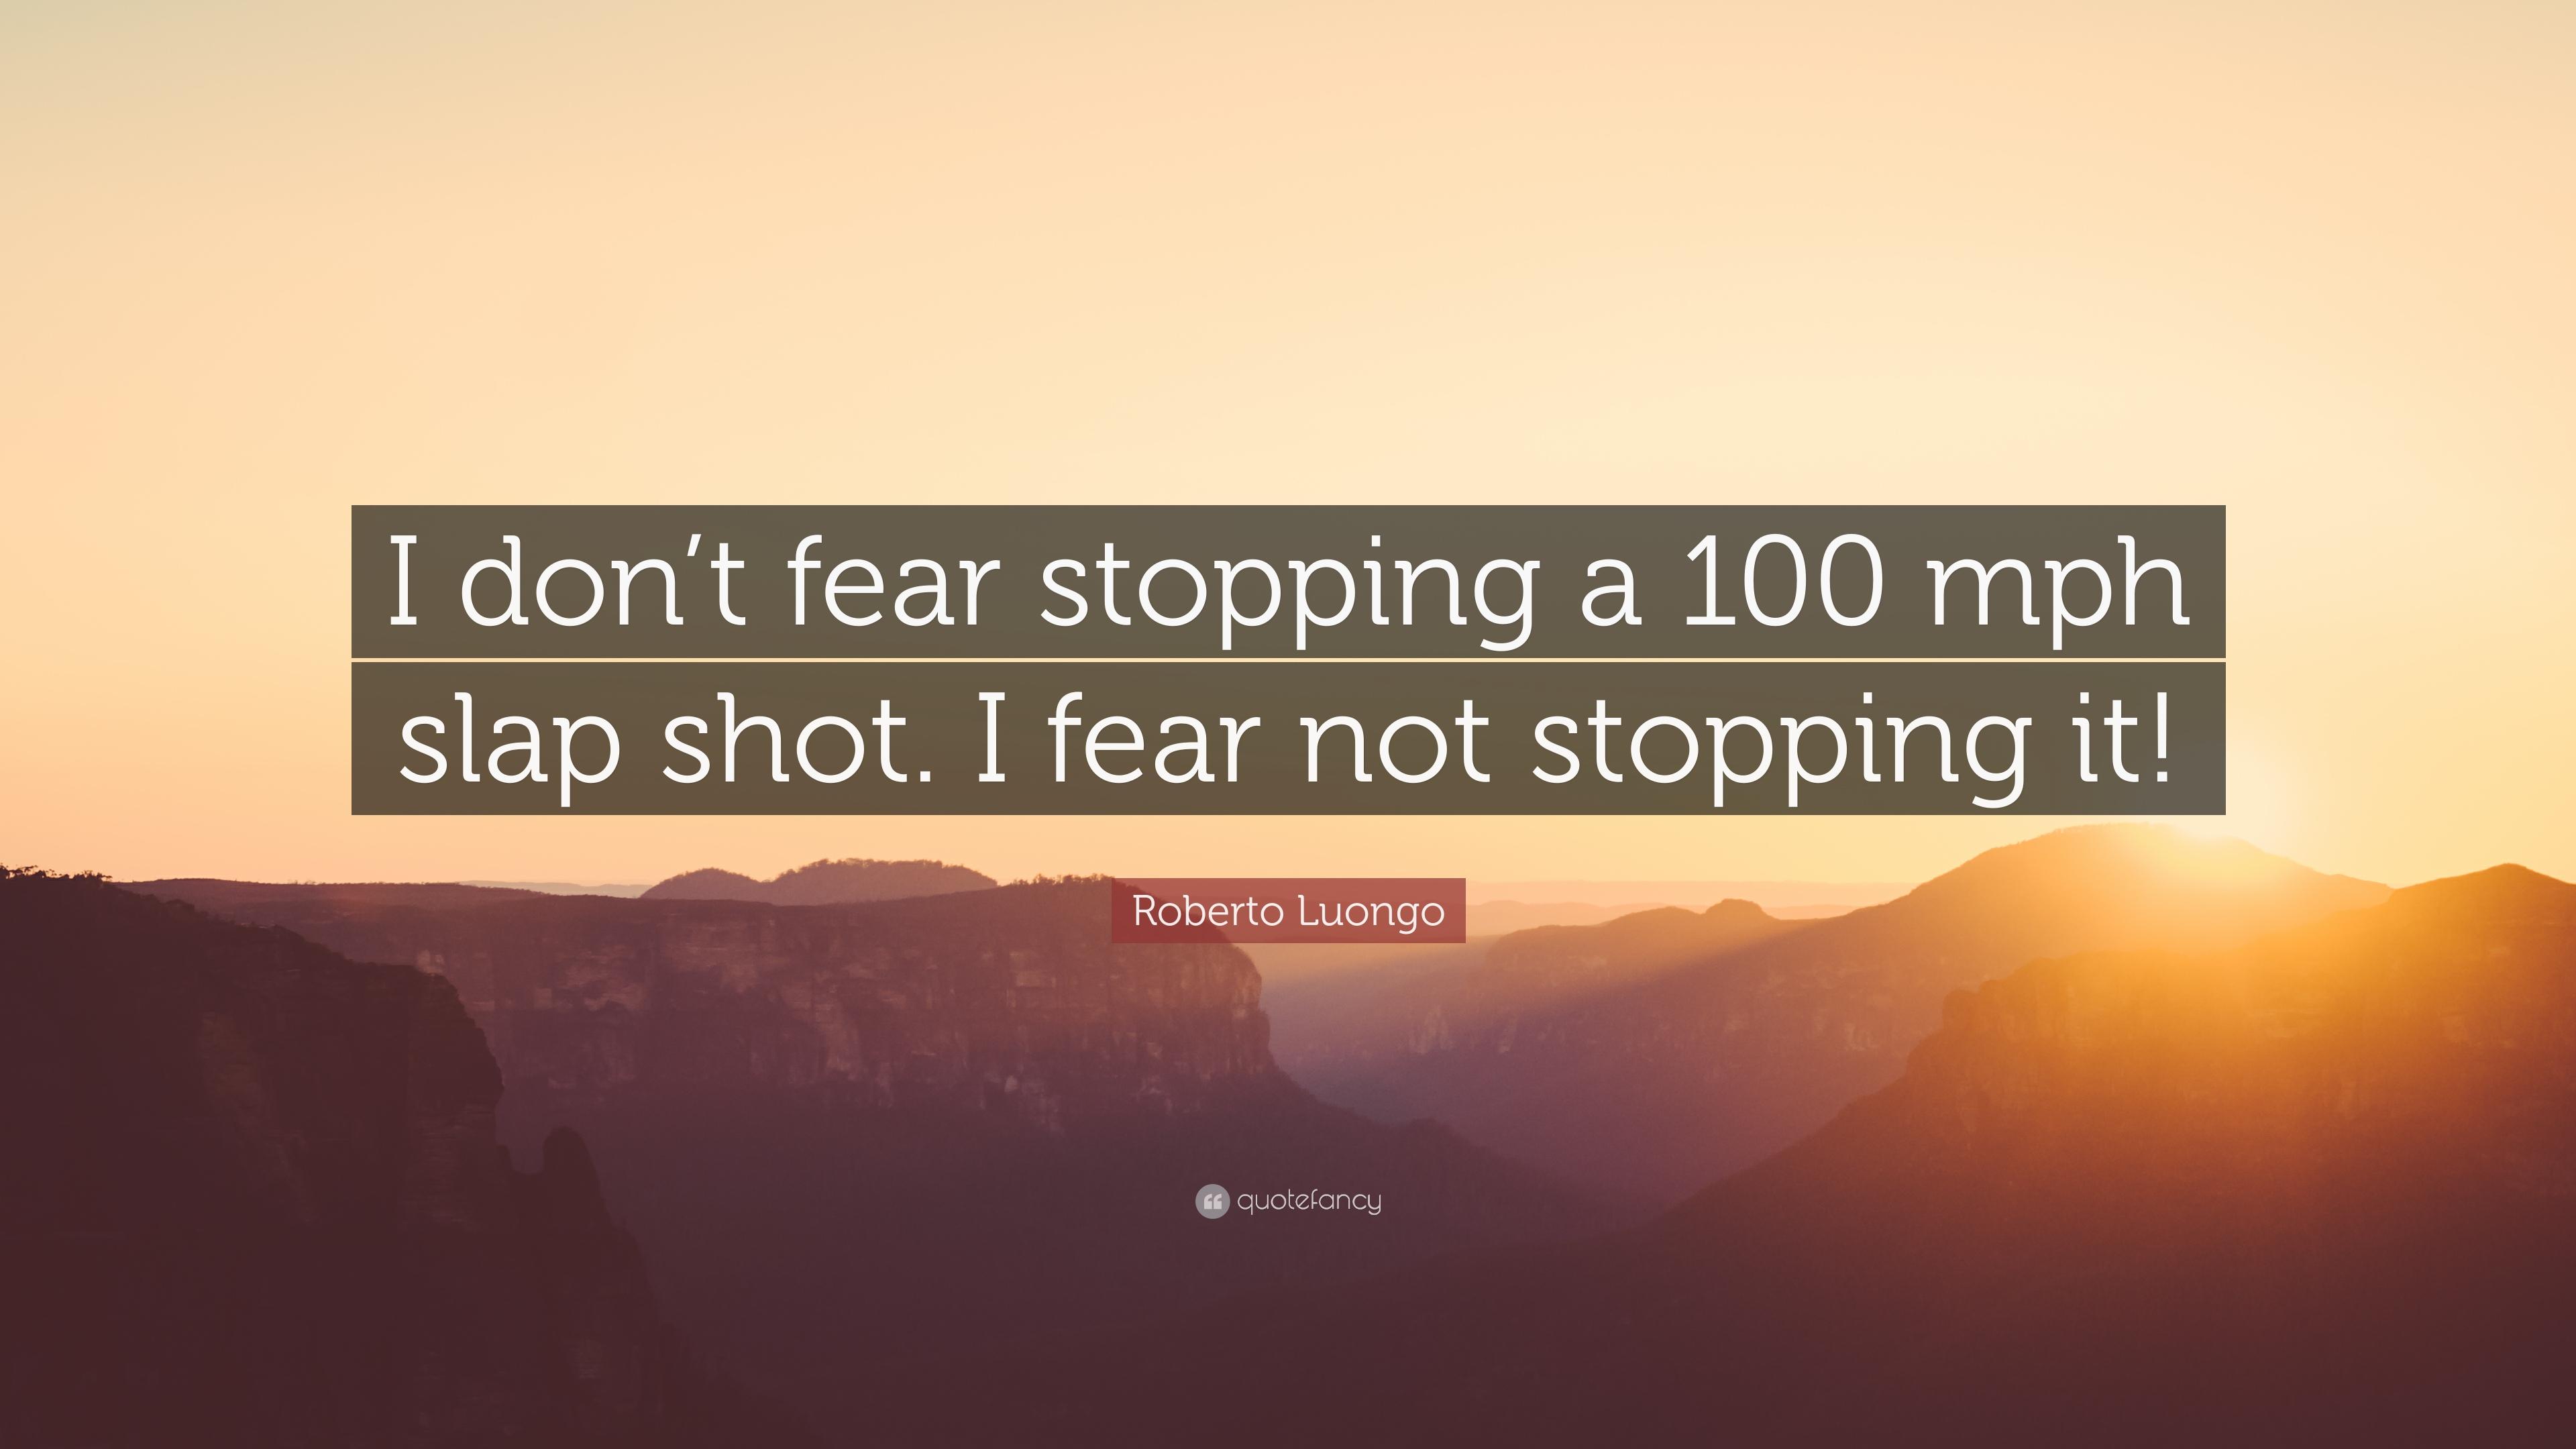 Roberto Luongo Quote: “I don't fear stopping a 100 mph slap shot. I